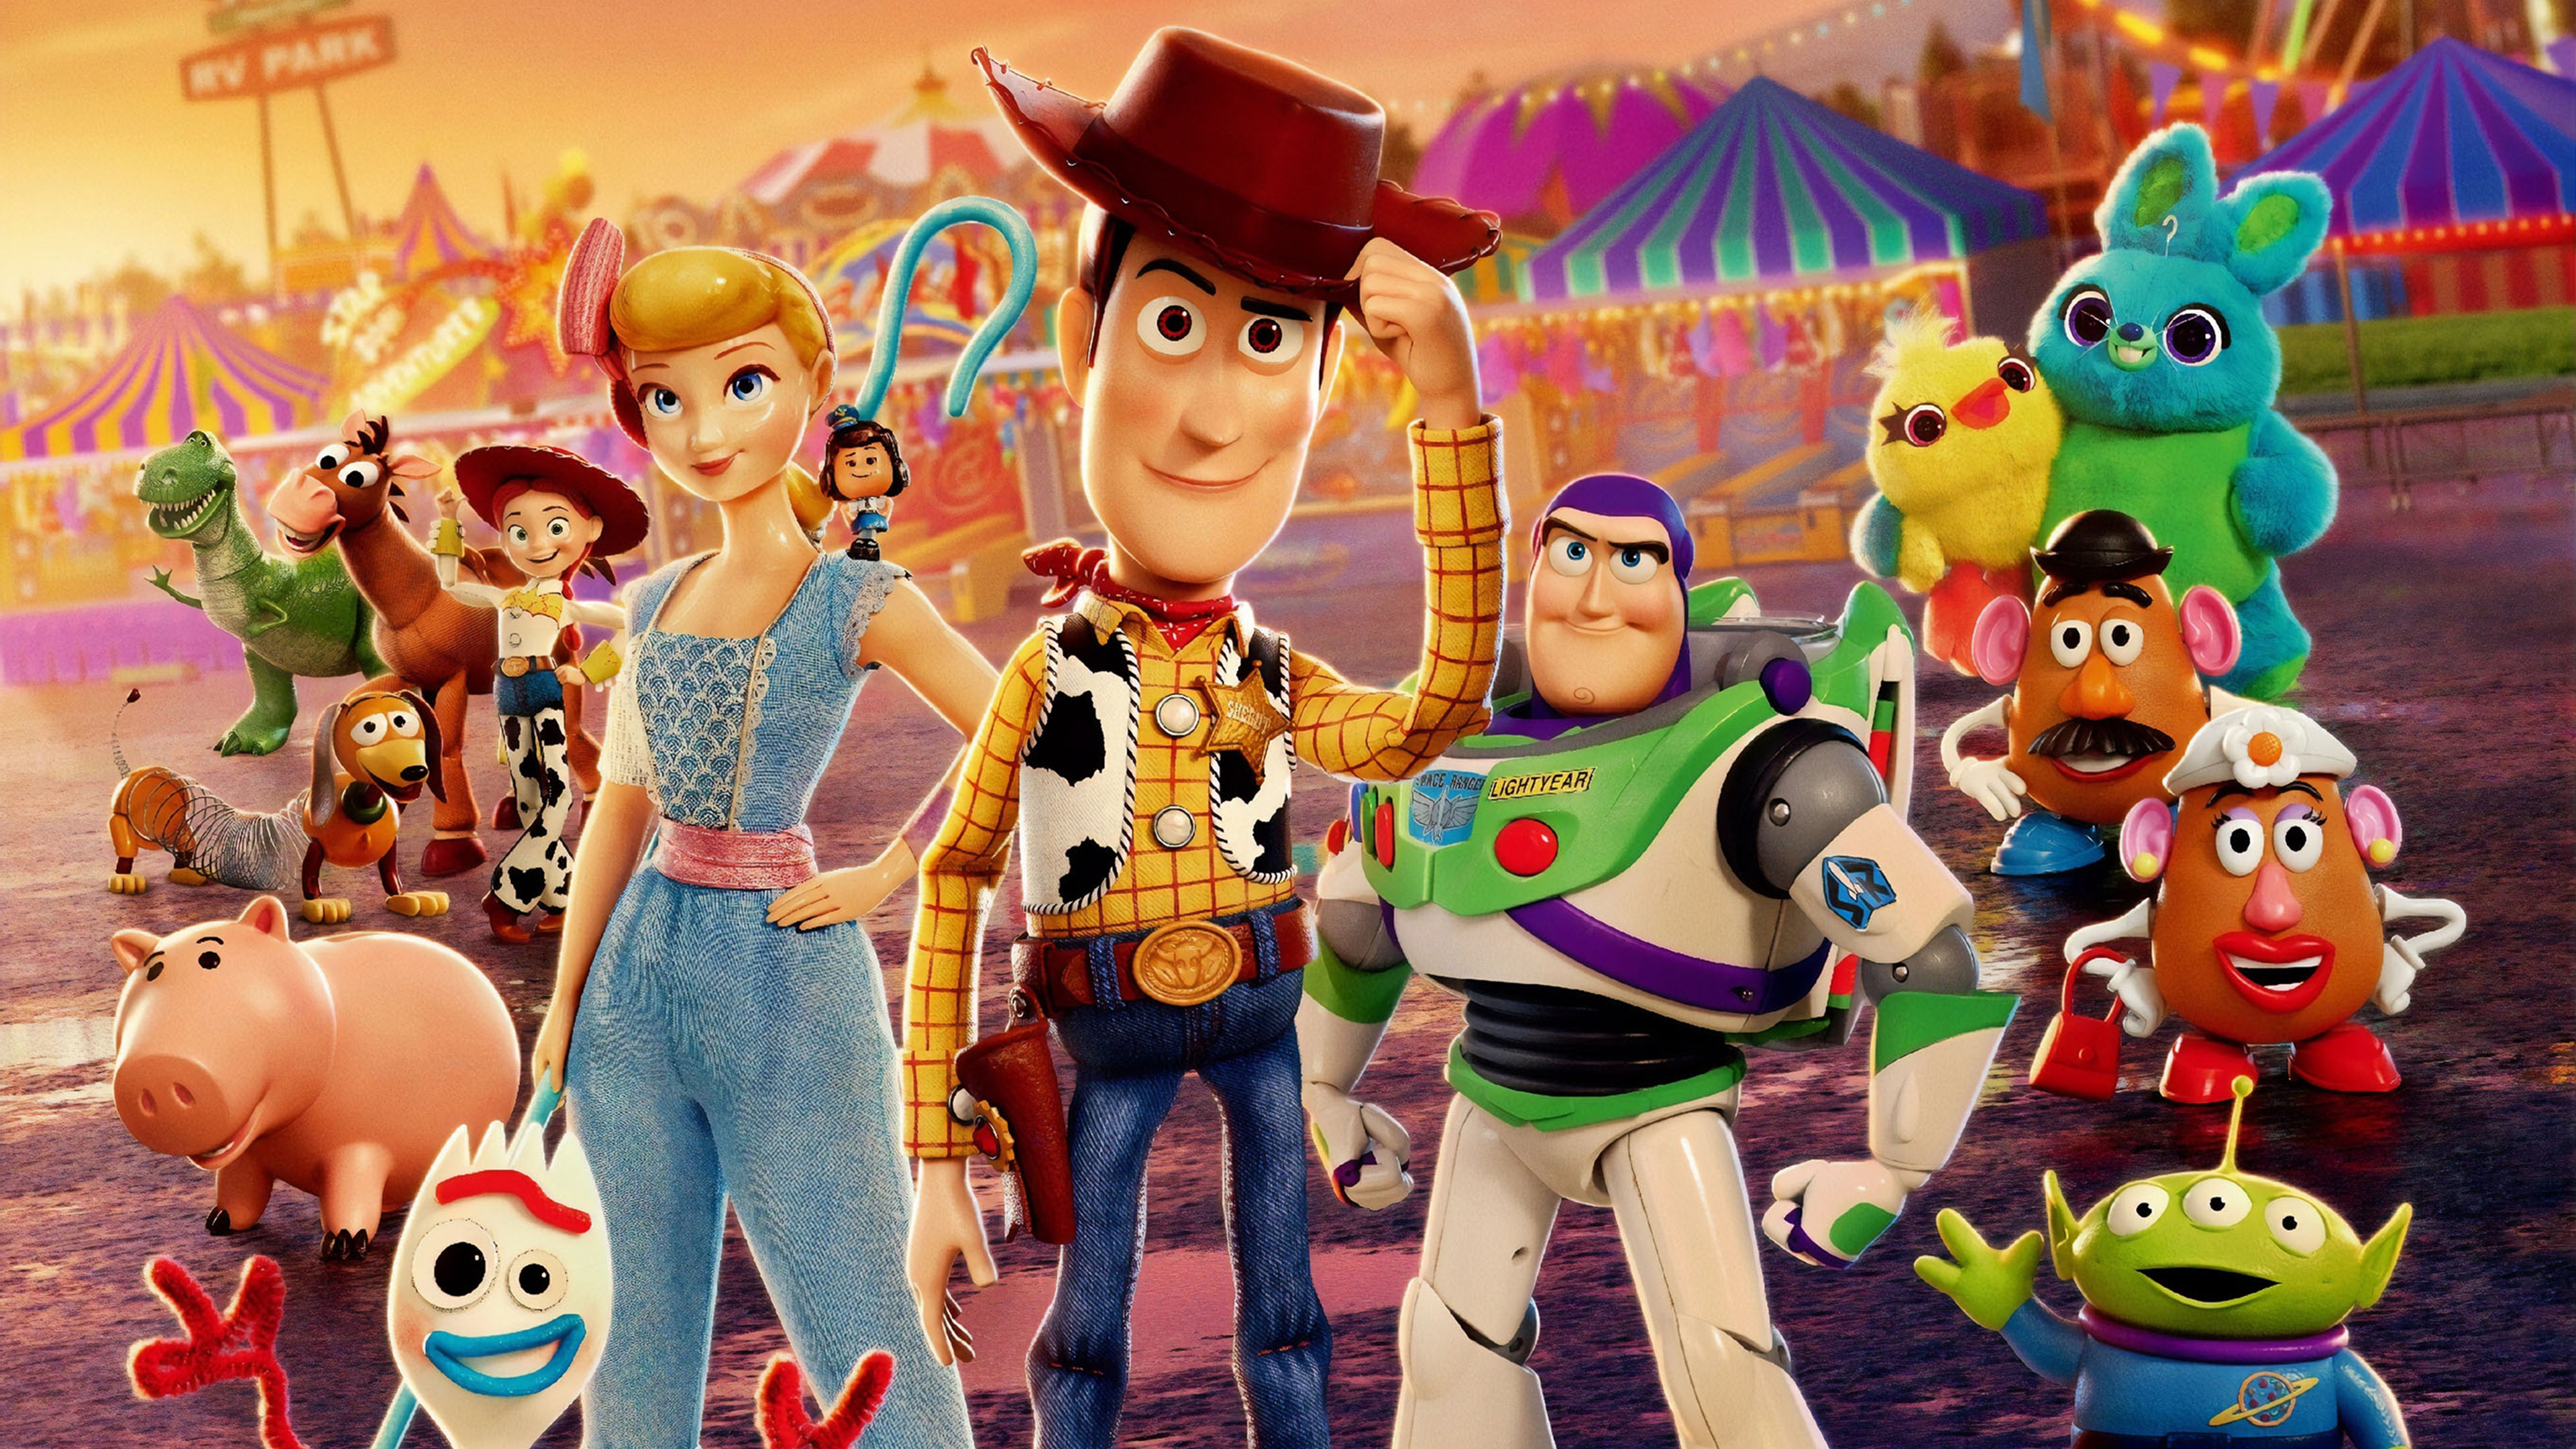 Download Wallpaper Toy Story Hd Nomer 8